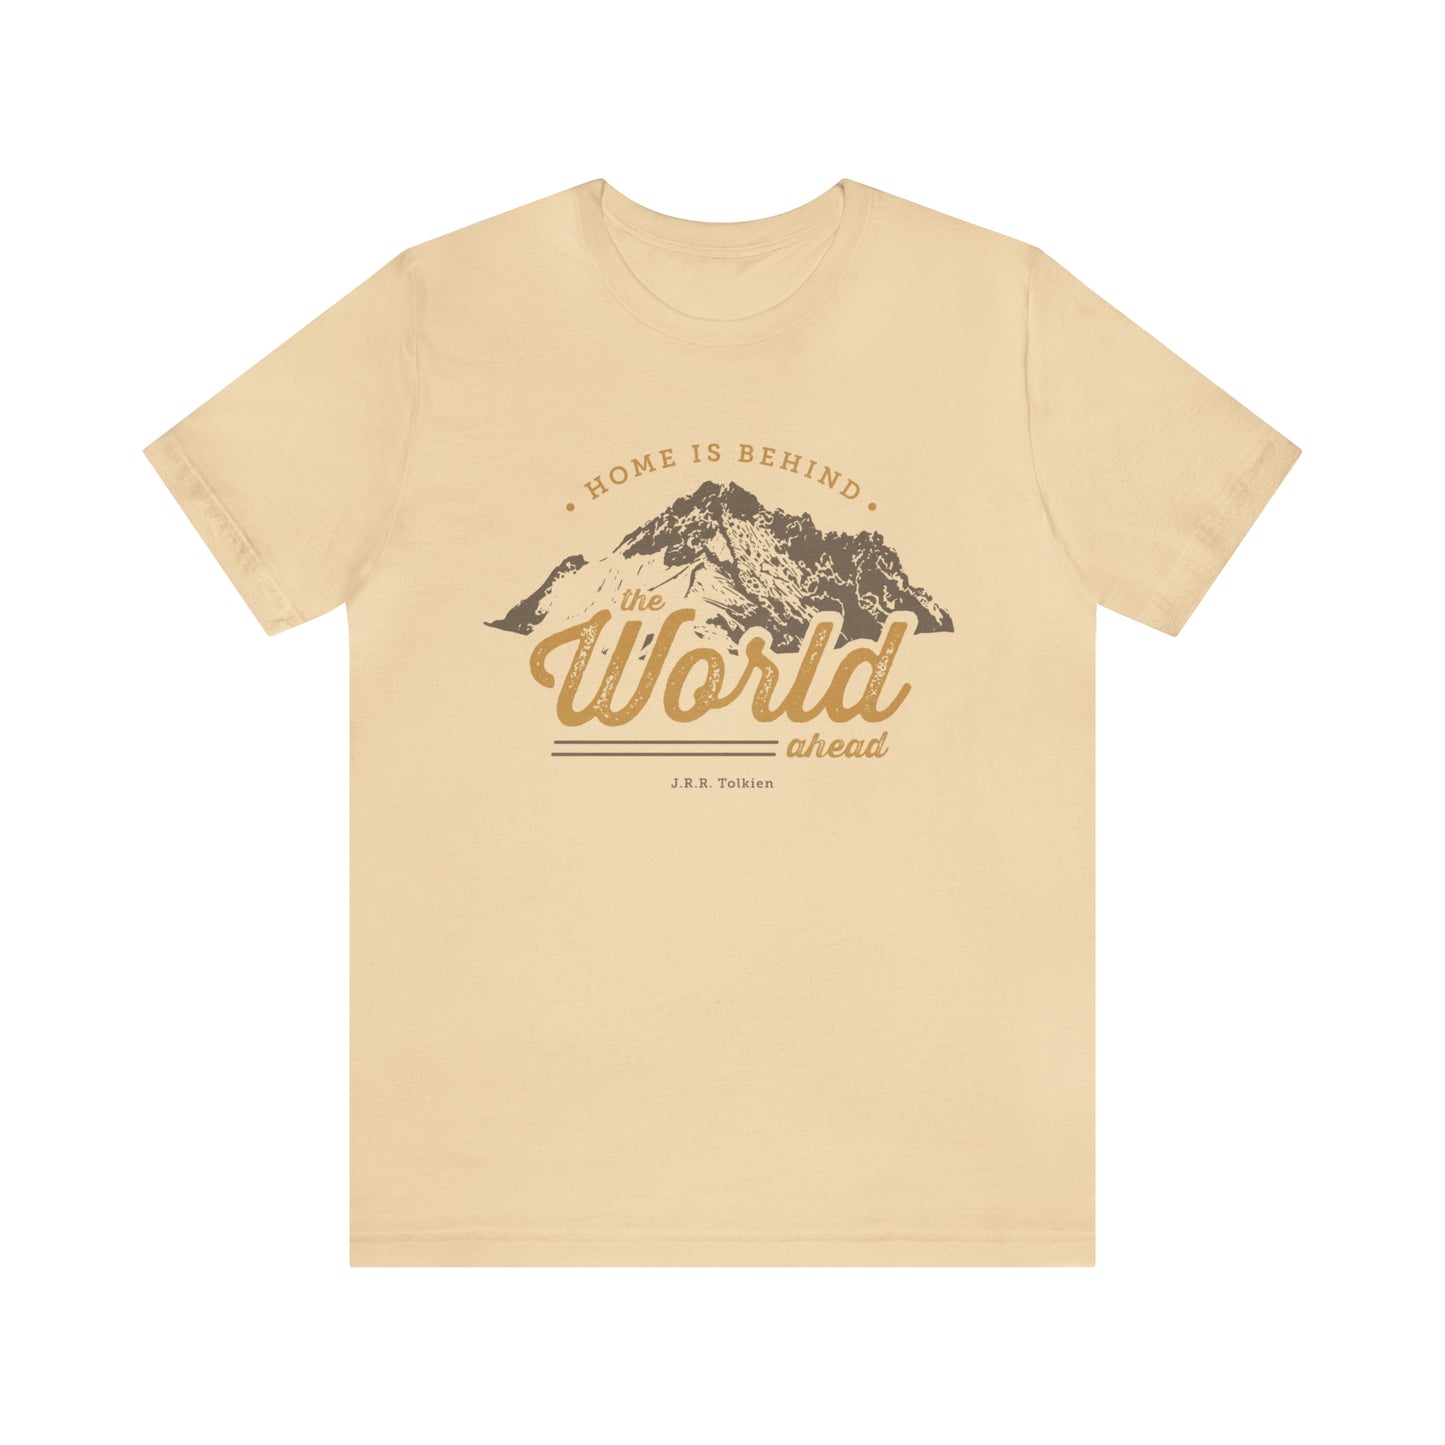 Home is behind the world ahead T-shirt